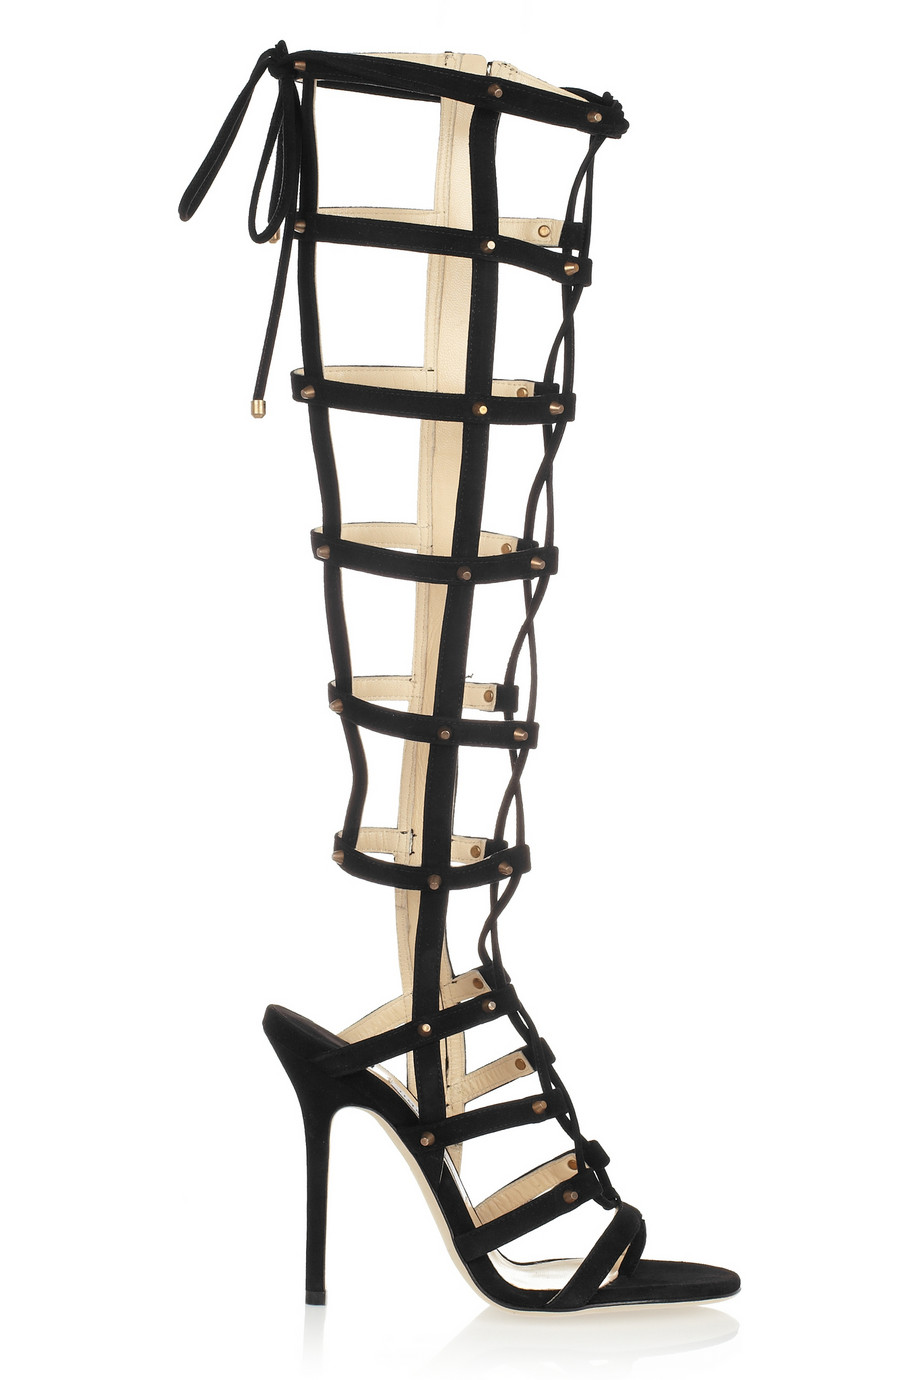 DIARY OF A CLOTHESHORSE: TODAY'S SHOES ARE FROM JIMMY CHOO